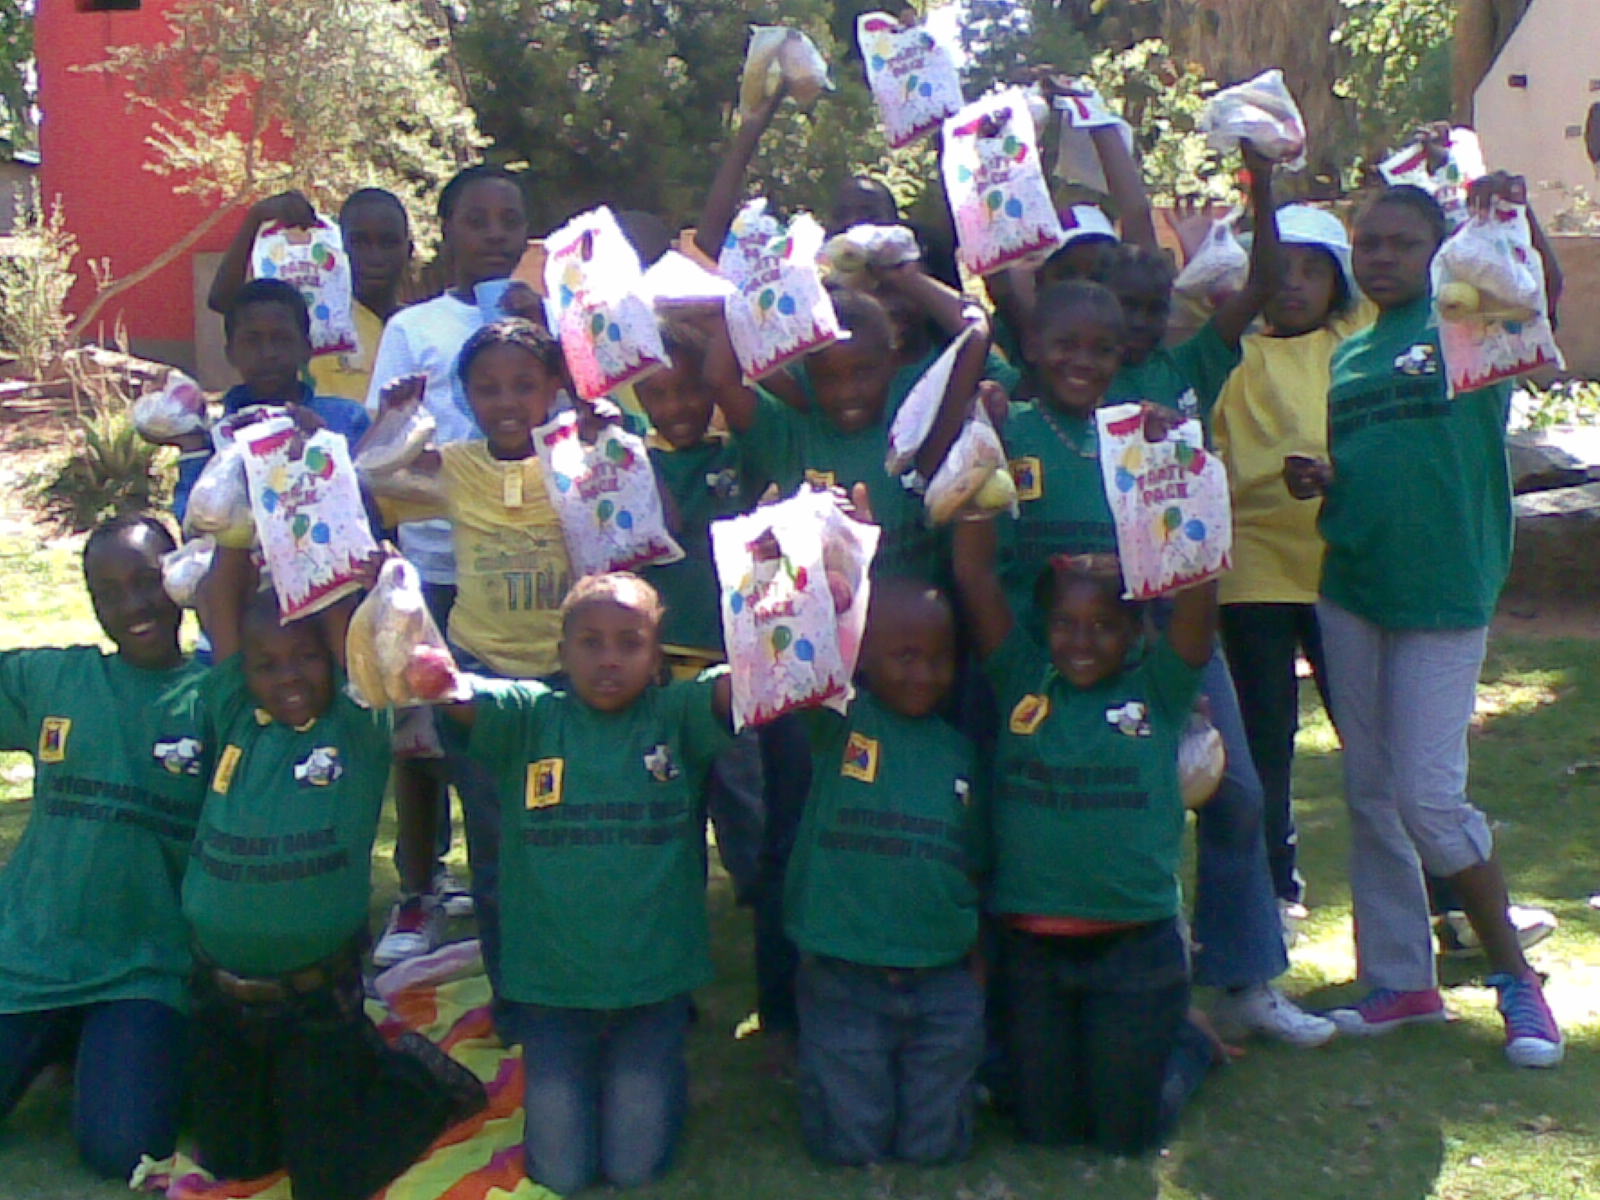 The children visited Pretoria Zoo and given Party Packs